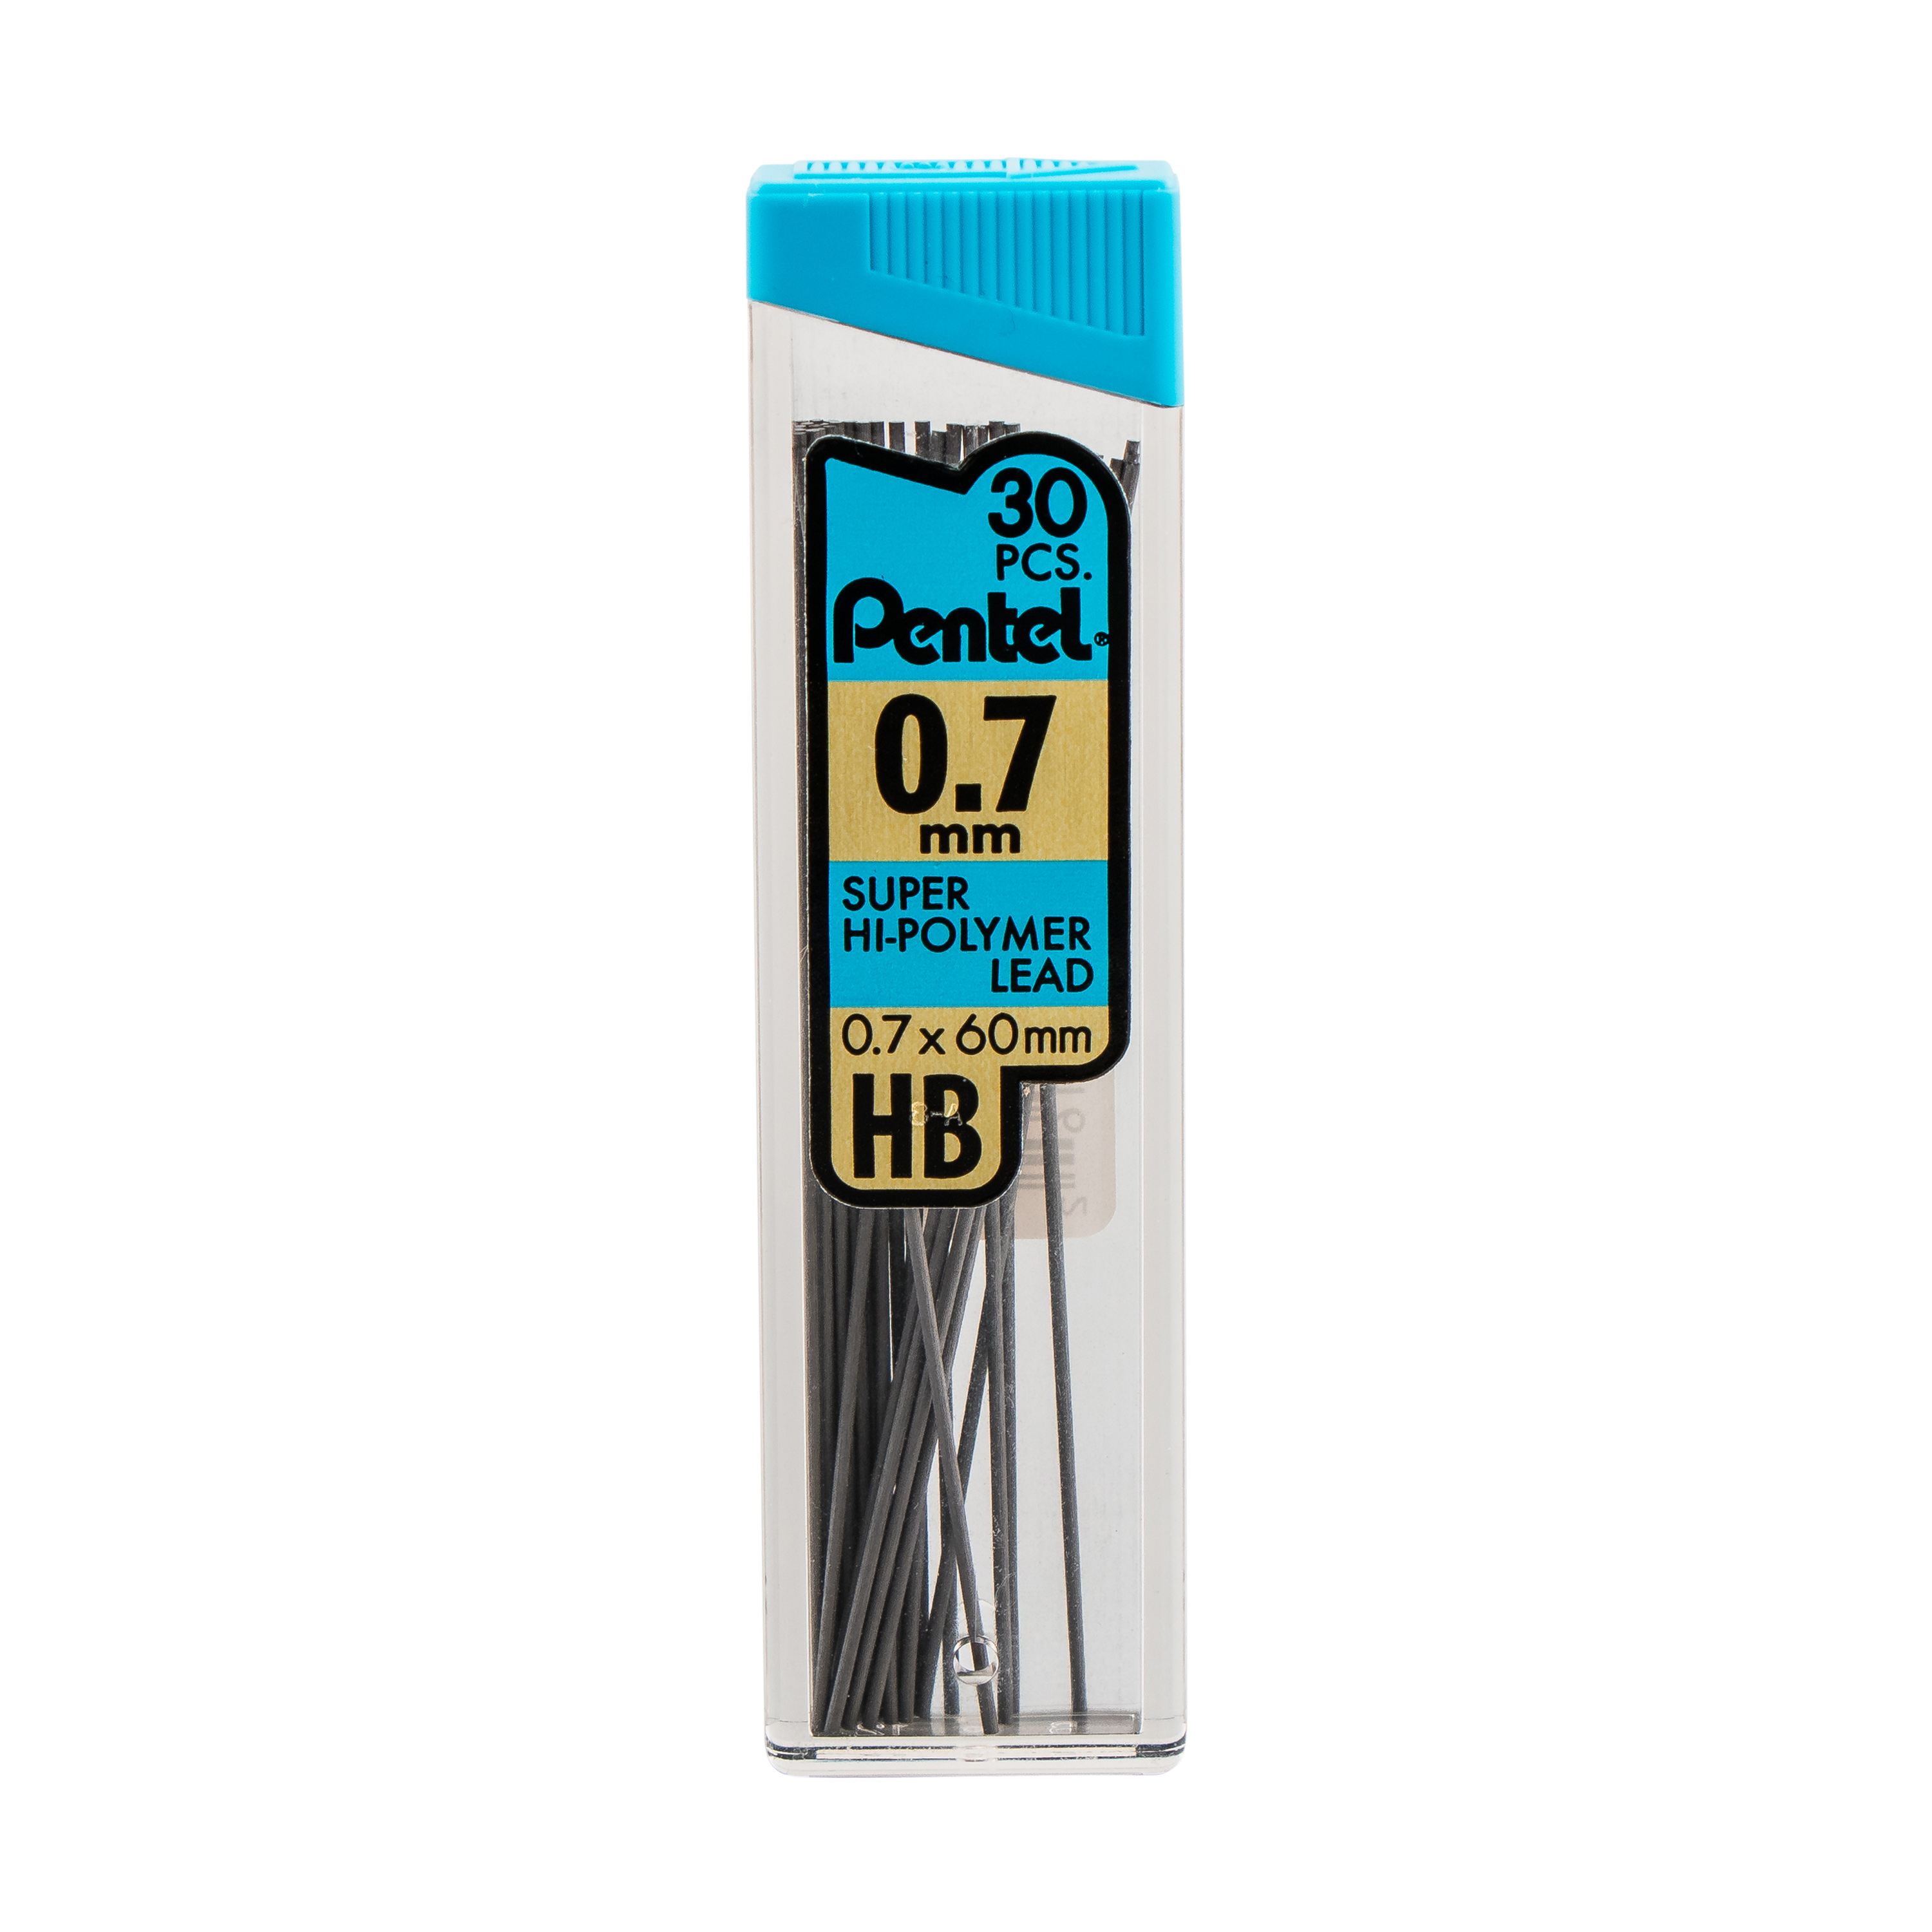 Super Hi-Polymer LEAD REFILL 3CT 0.7MM - image 2 of 5